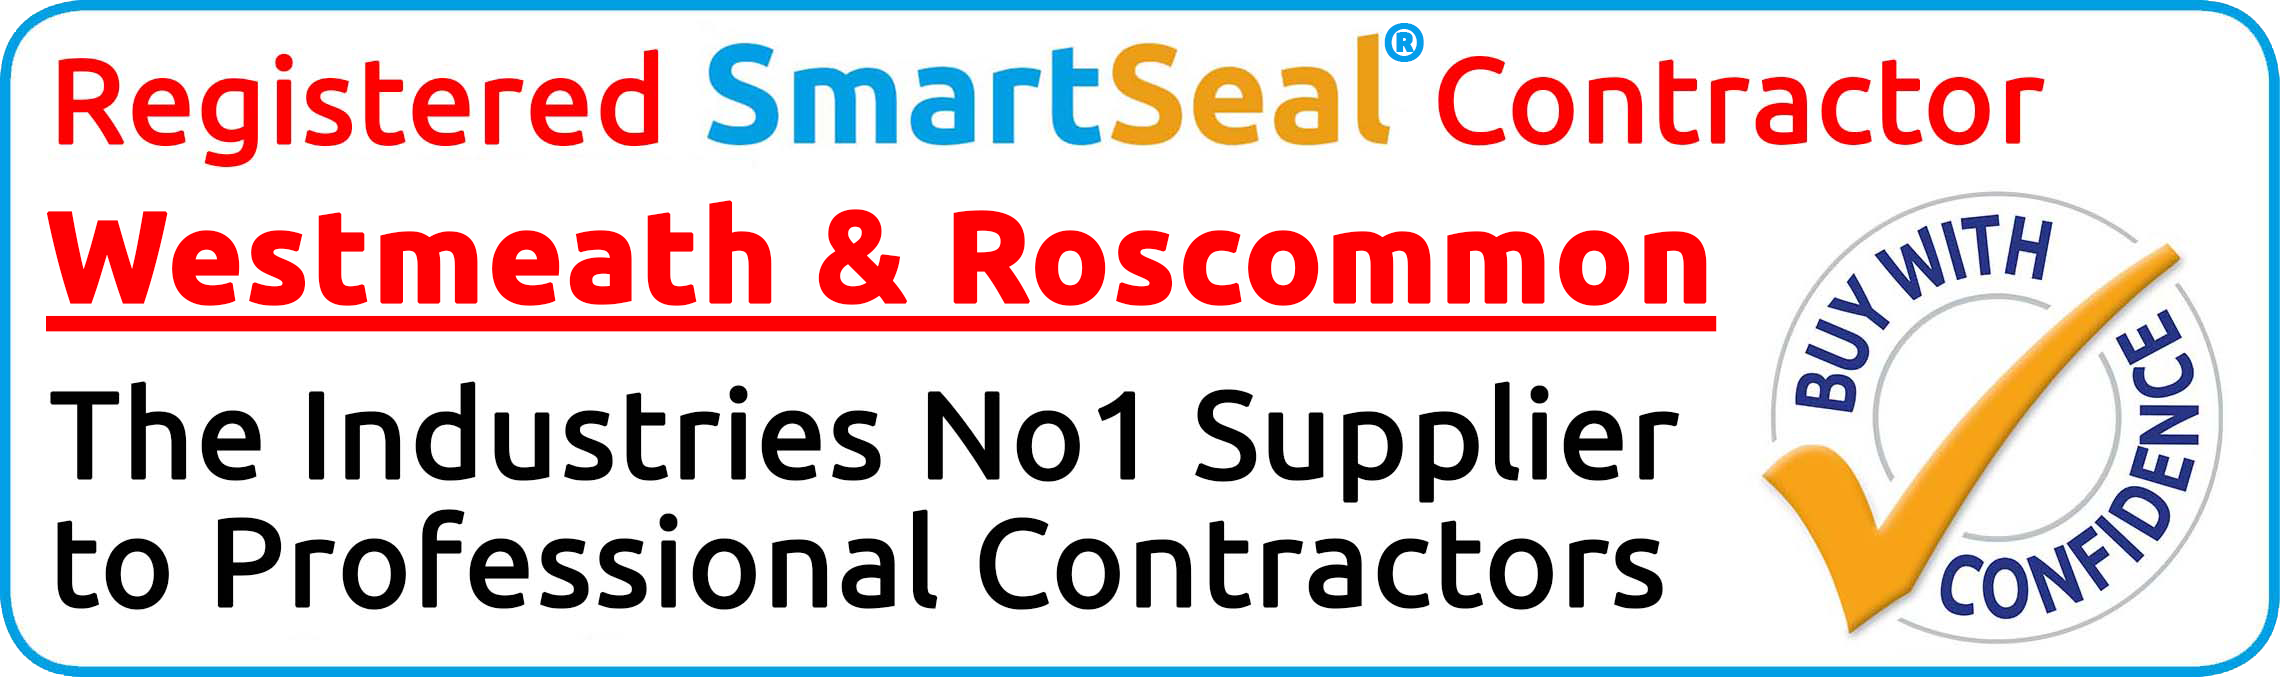 Registered SmartSeal Contractor Westmeath & Roscommon